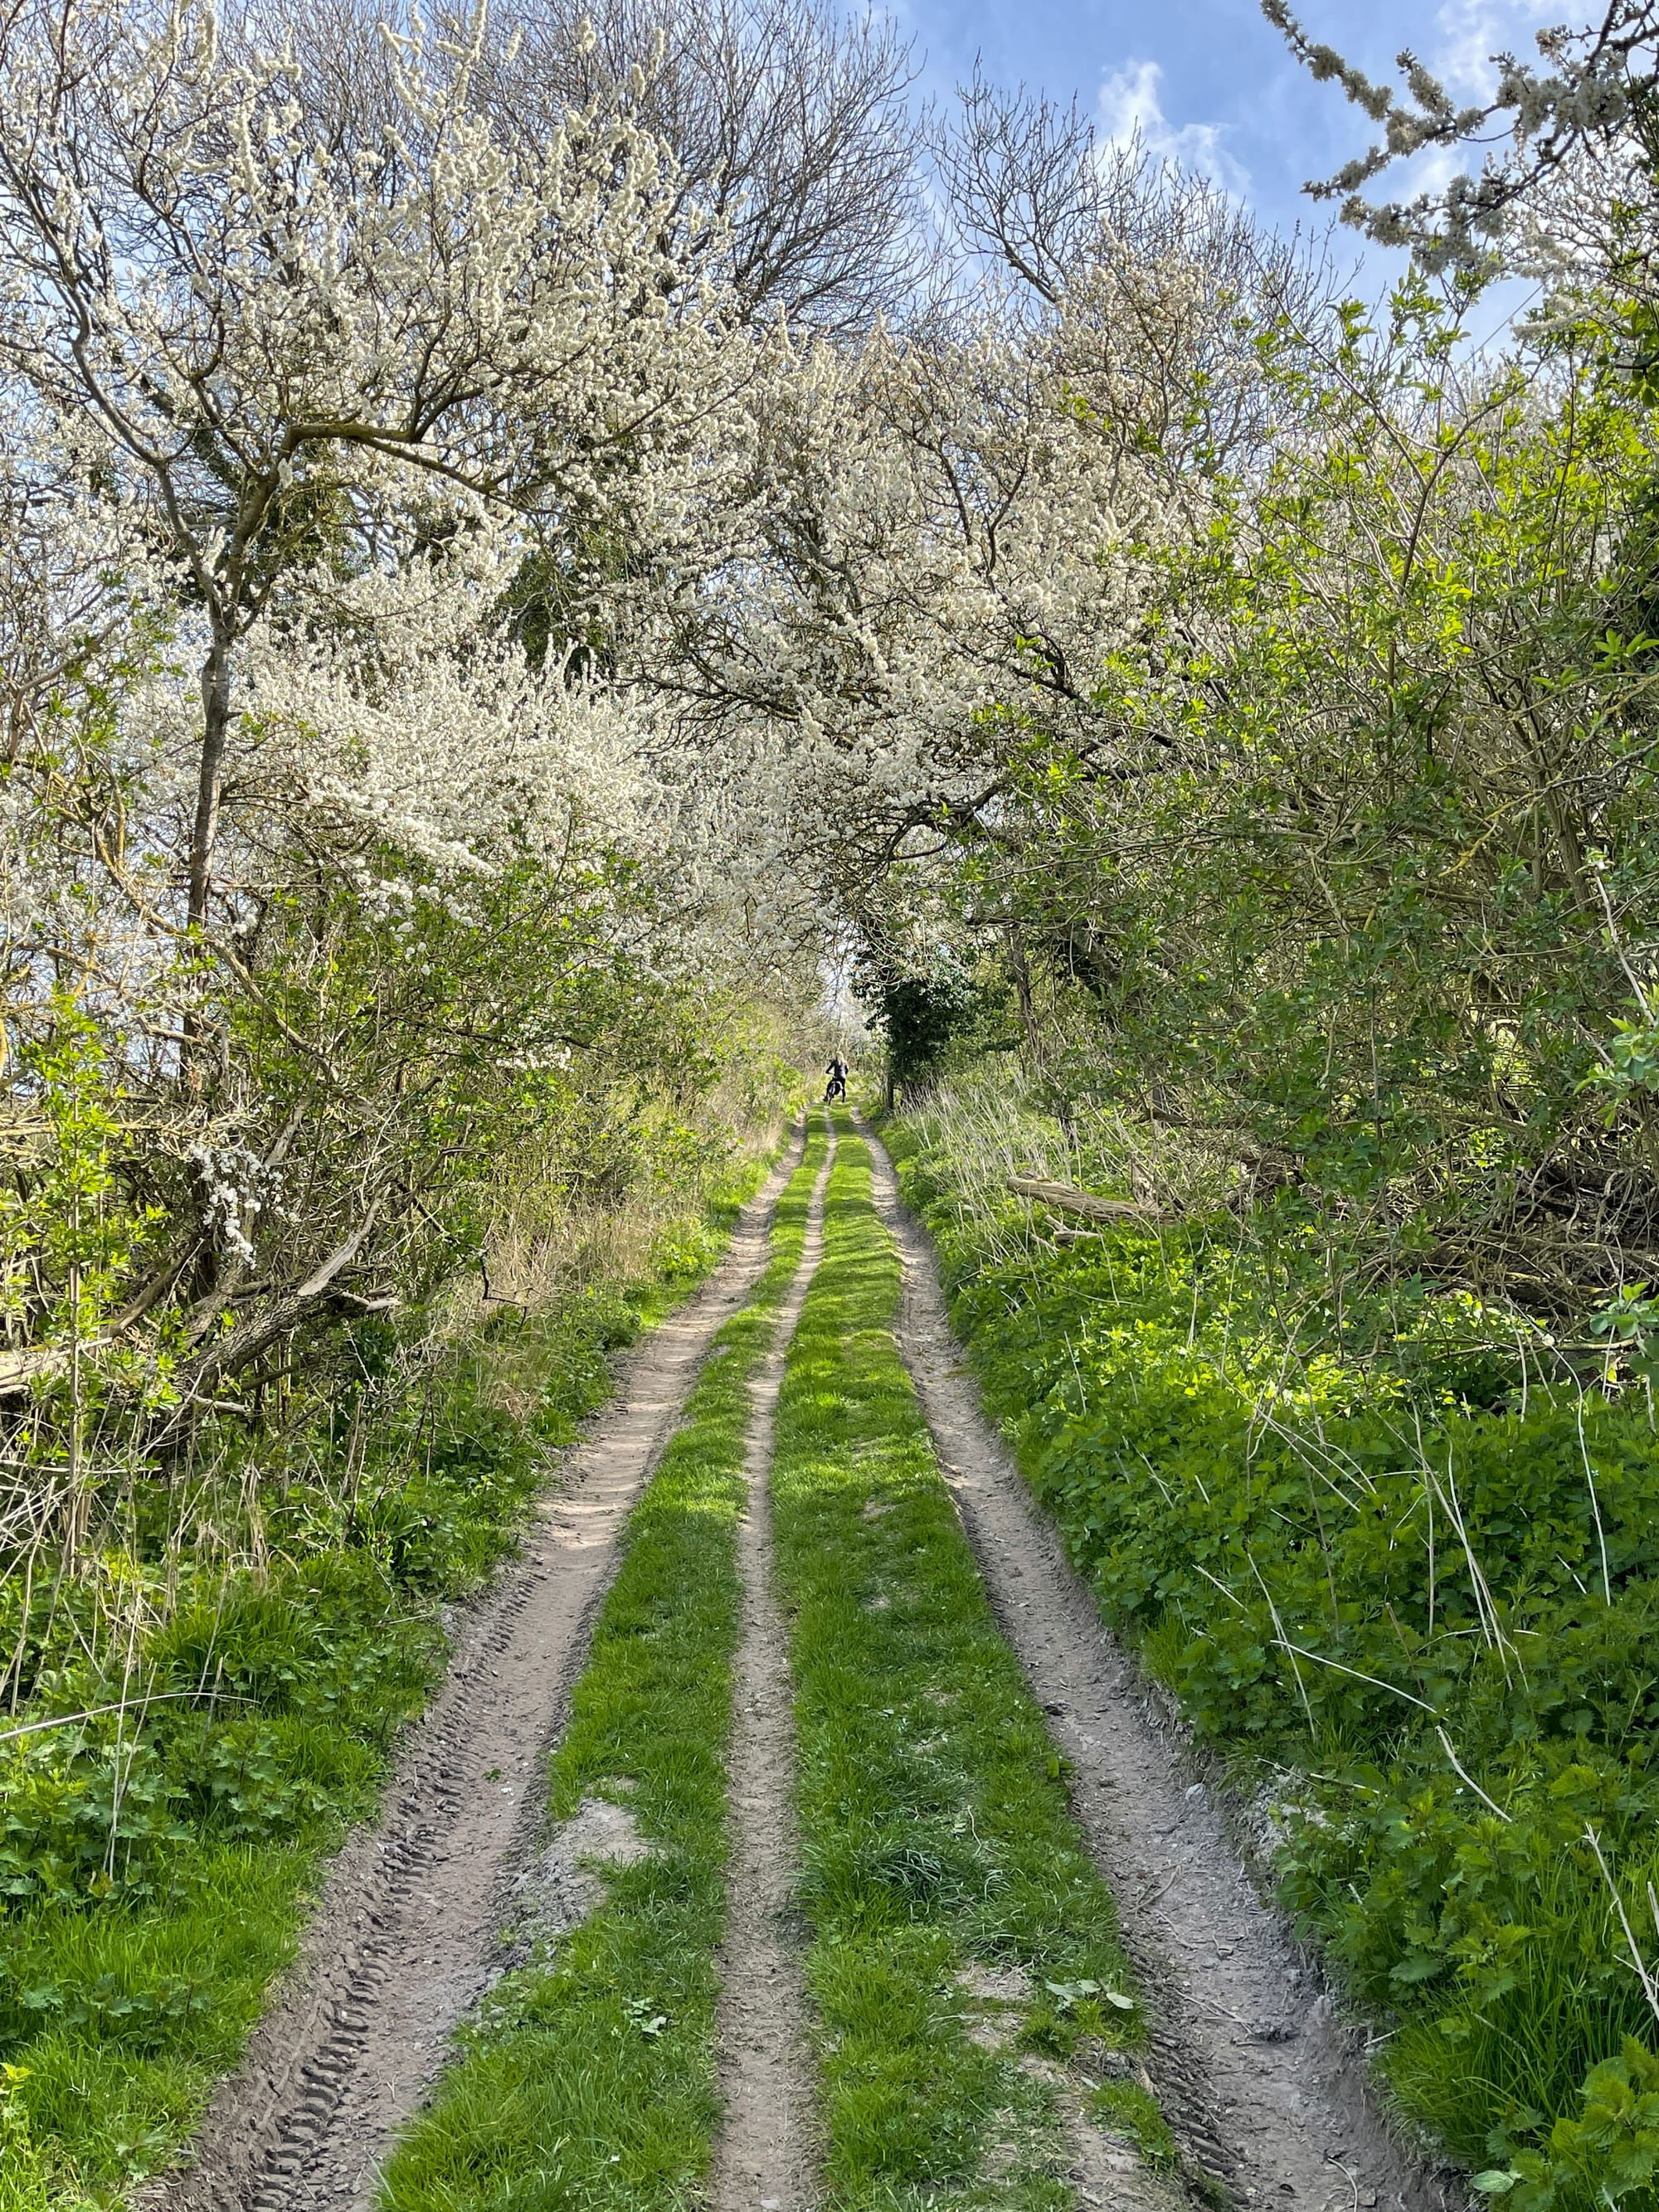 A Cold Wind Stirs the Blackthorn. Beddingham, East Sussex